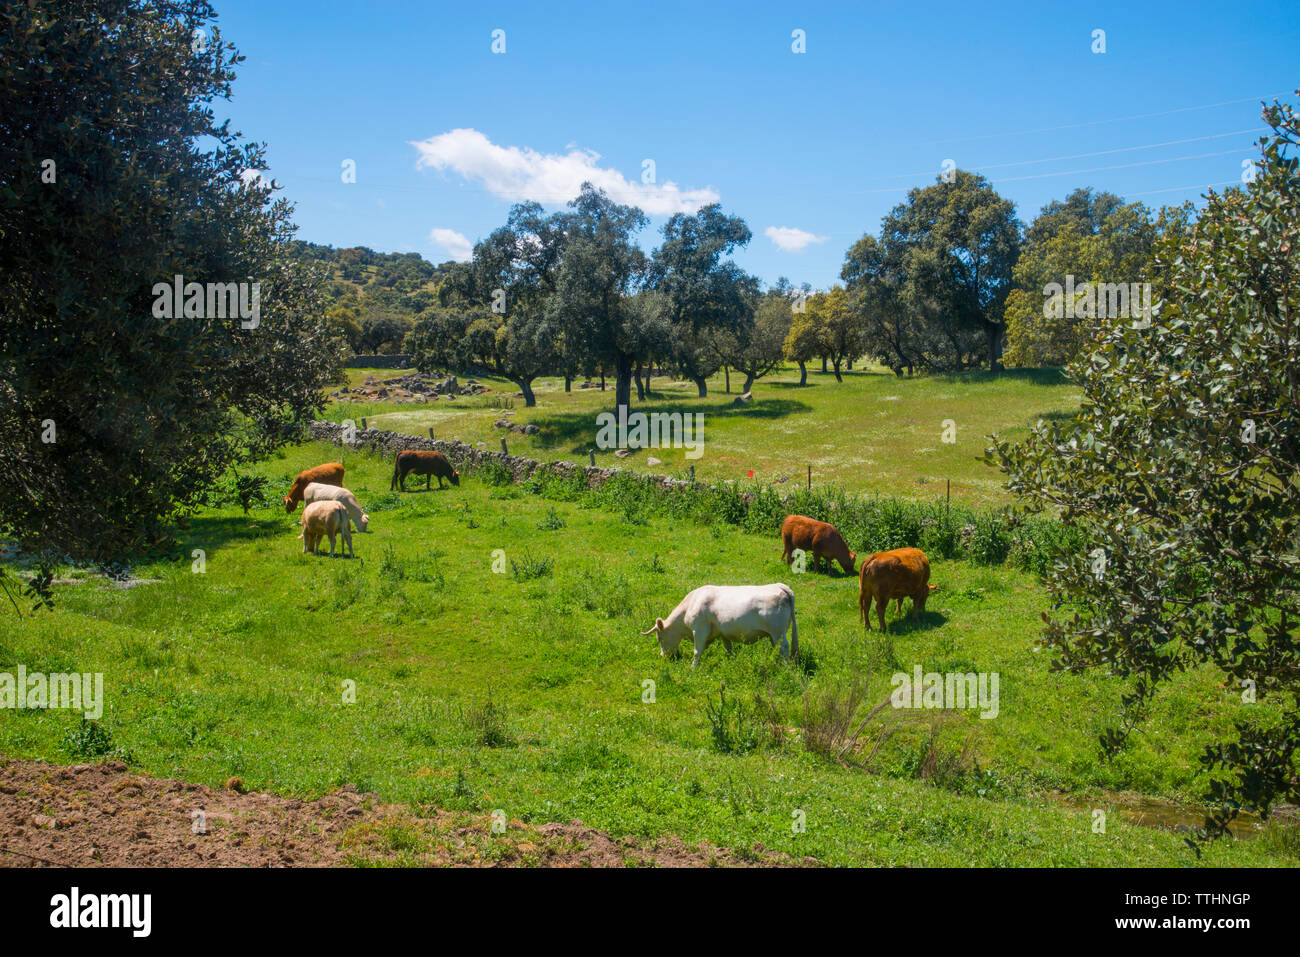 Cows grazing in a meadow. Valle de los Pedroches, Cordoba province, Andalucia, Spain. Stock Photo